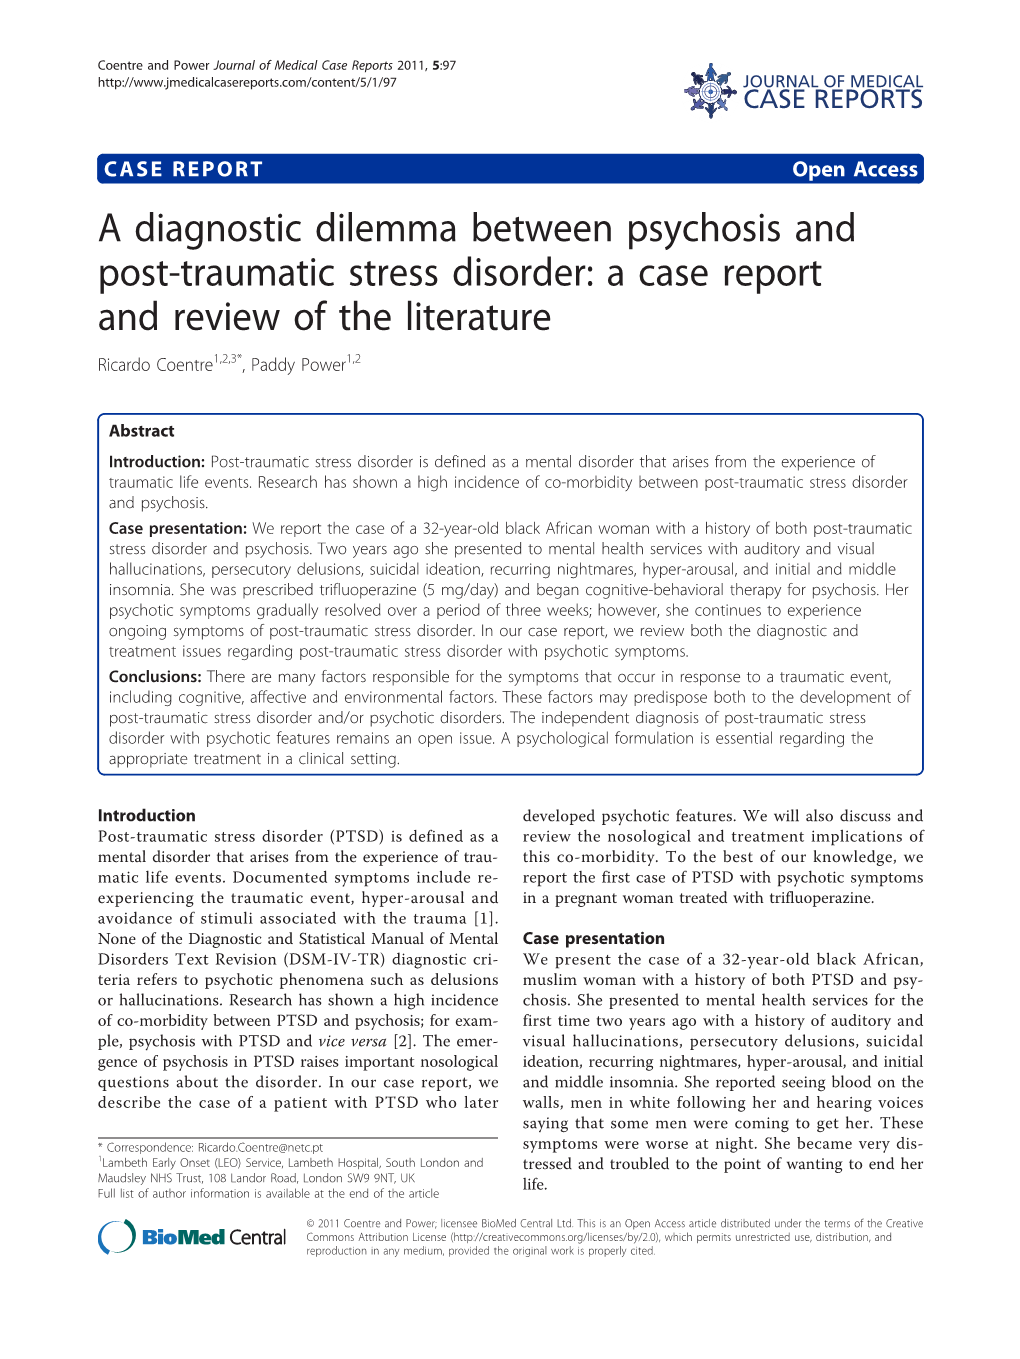 A Diagnostic Dilemma Between Psychosis and Post-Traumatic Stress Disorder: a Case Report and Review of the Literature Ricardo Coentre1,2,3*, Paddy Power1,2